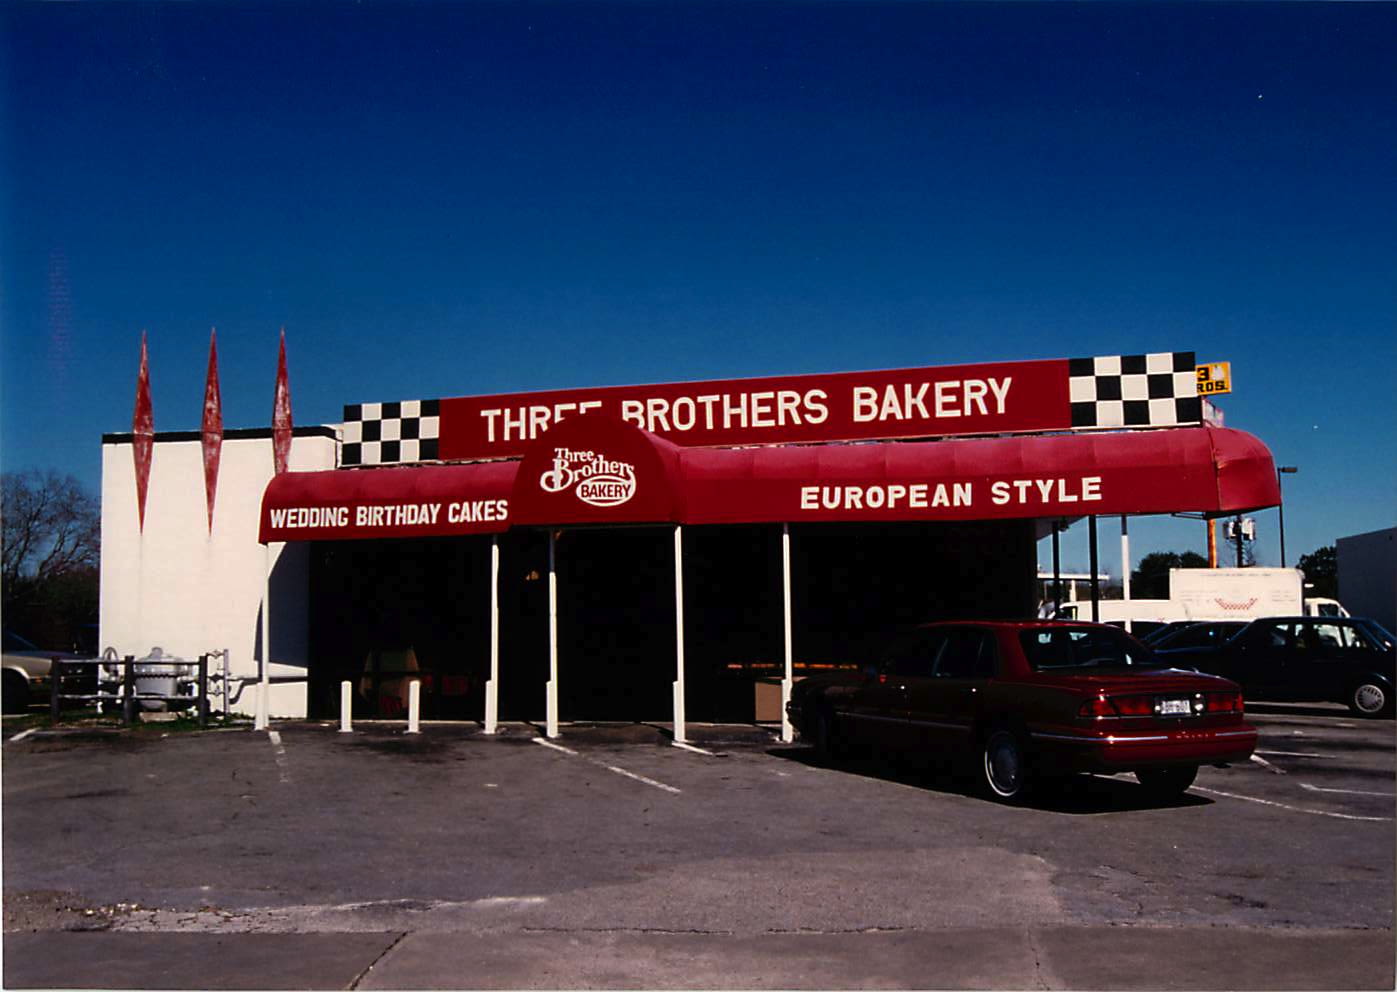 Drivers keep crashing into this Houston Bakery. But it survives.